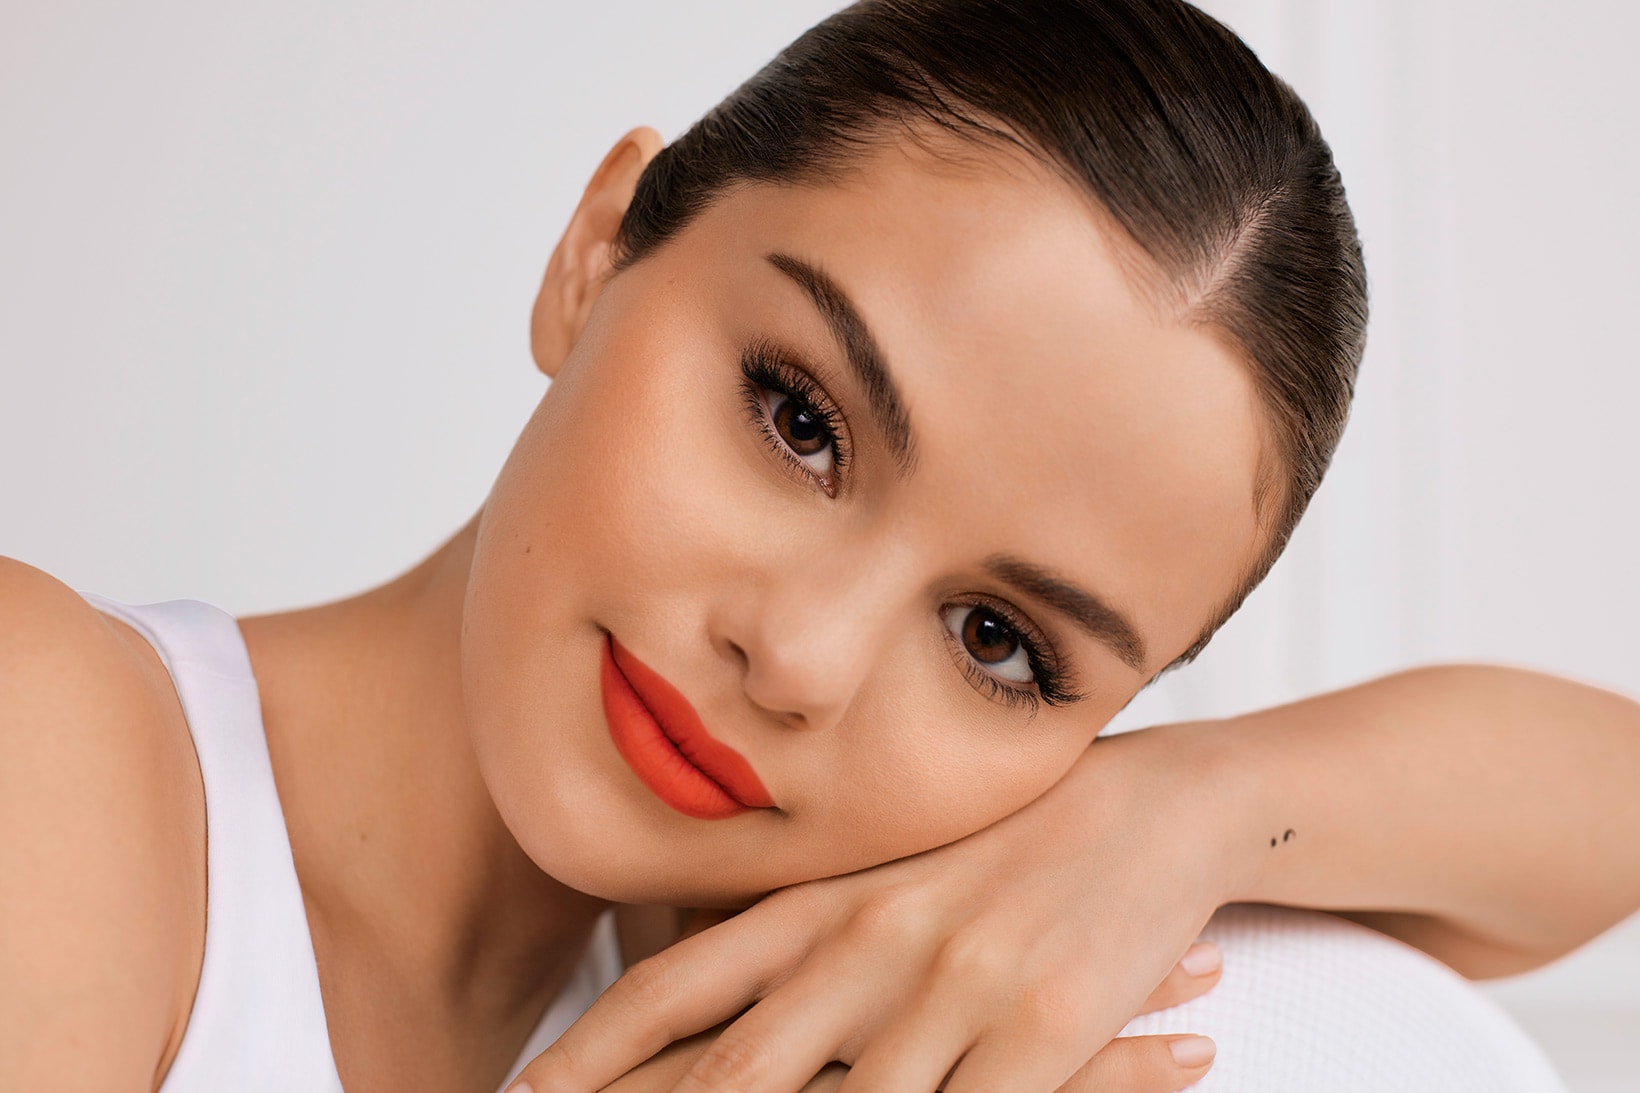 selena gomez rare beauty makeup brand launch release first collection foundation eyeliner lipstick mist